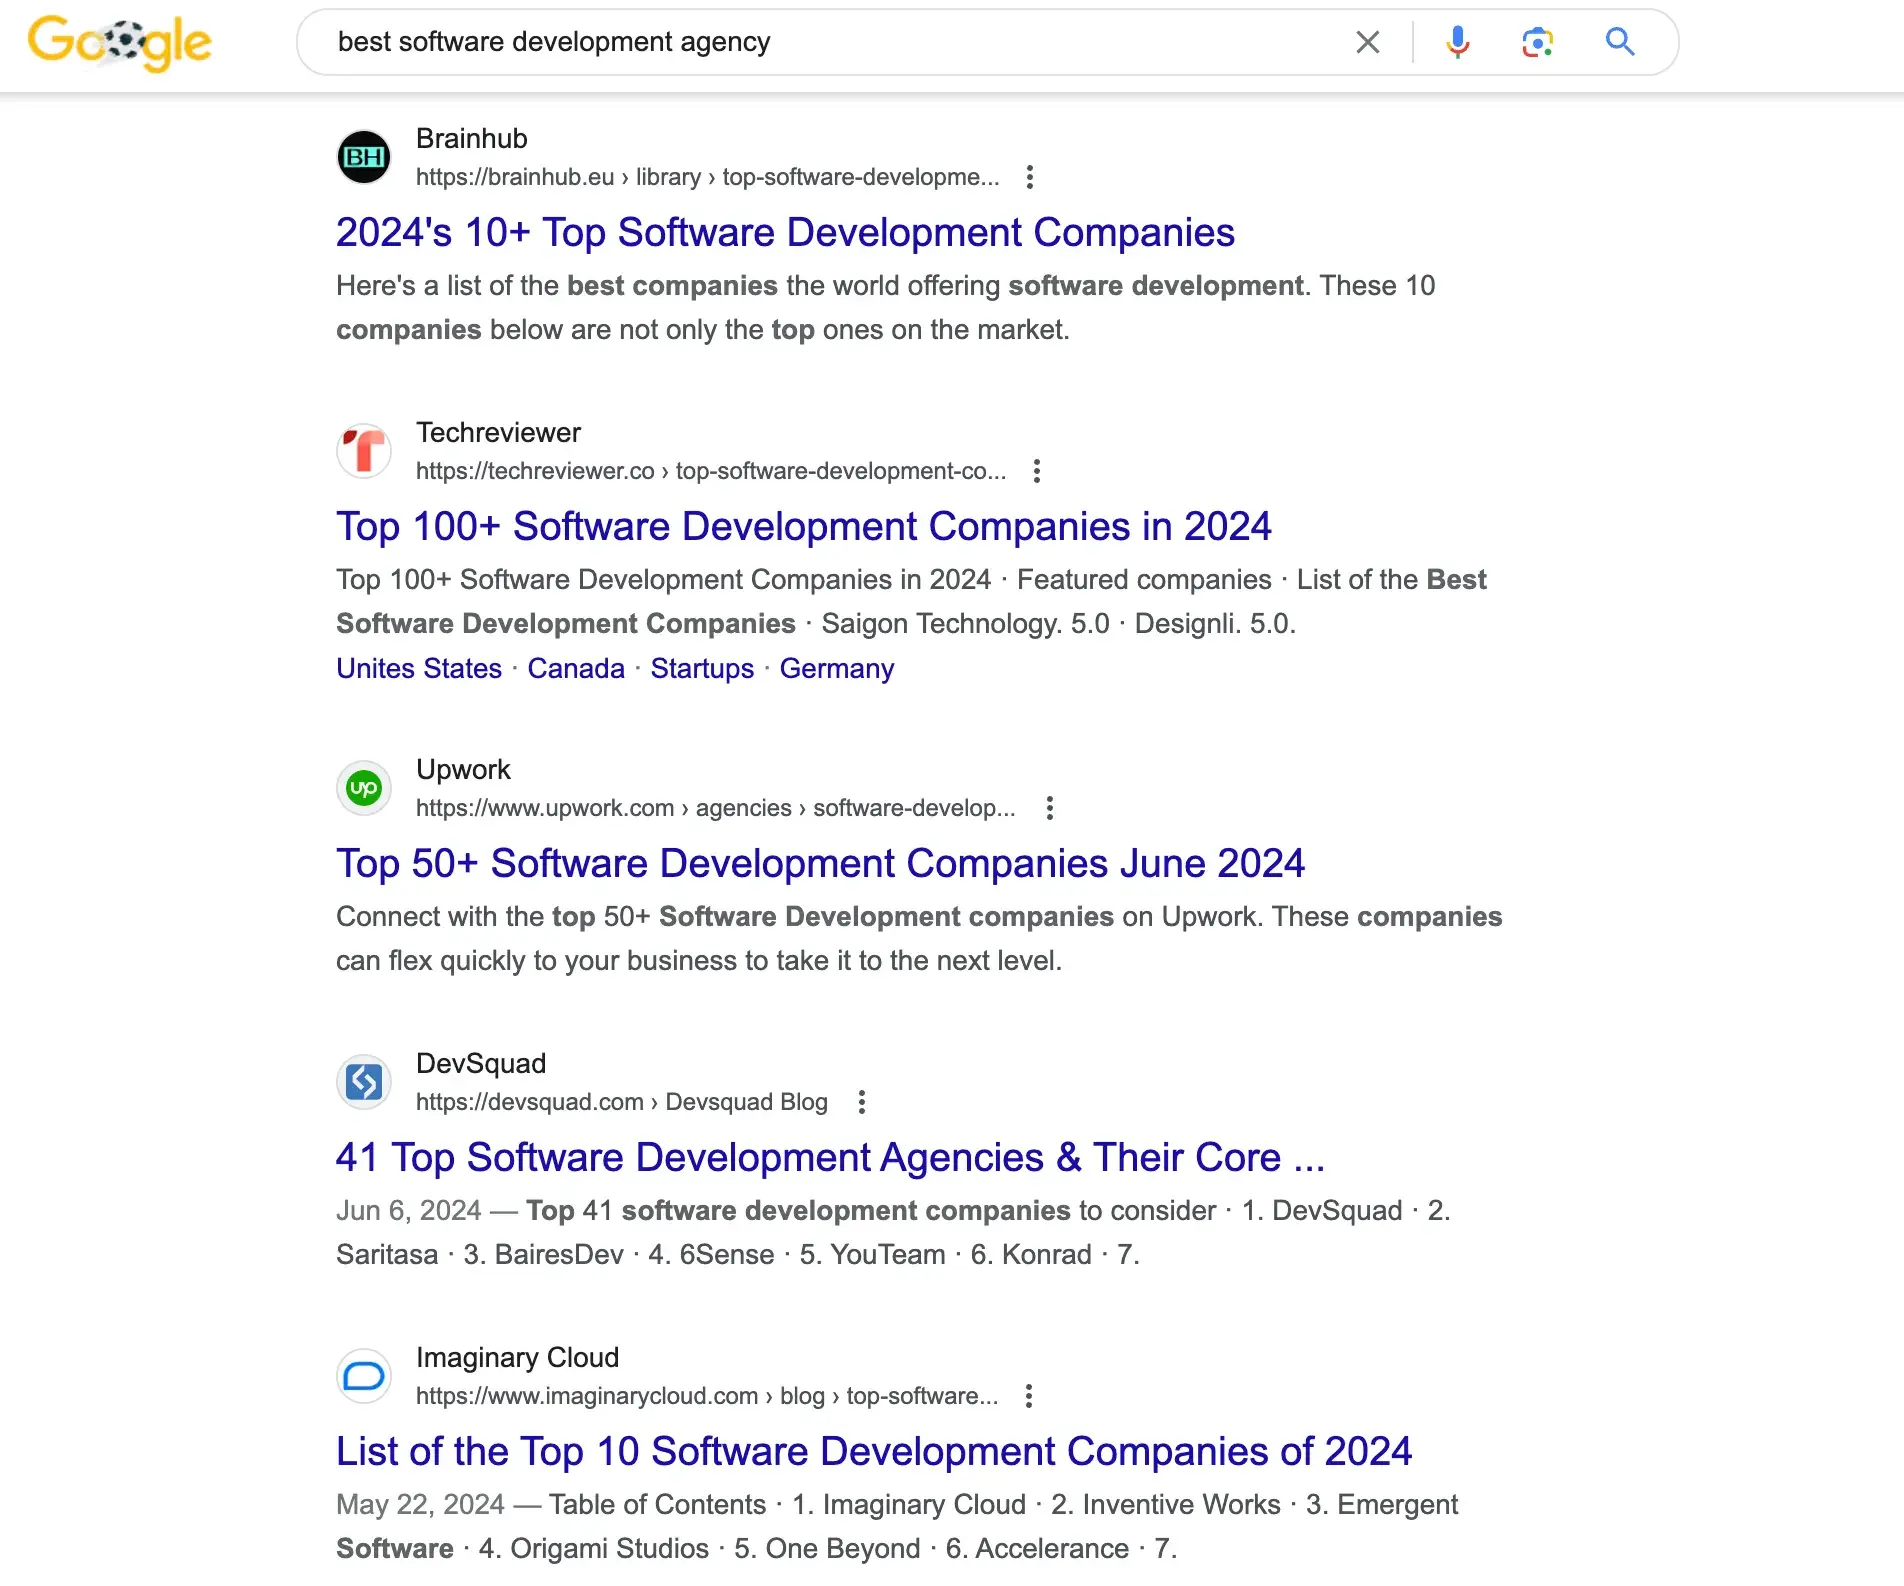 B2B SEO strategy; results from a Google search on ‘best software development agency’